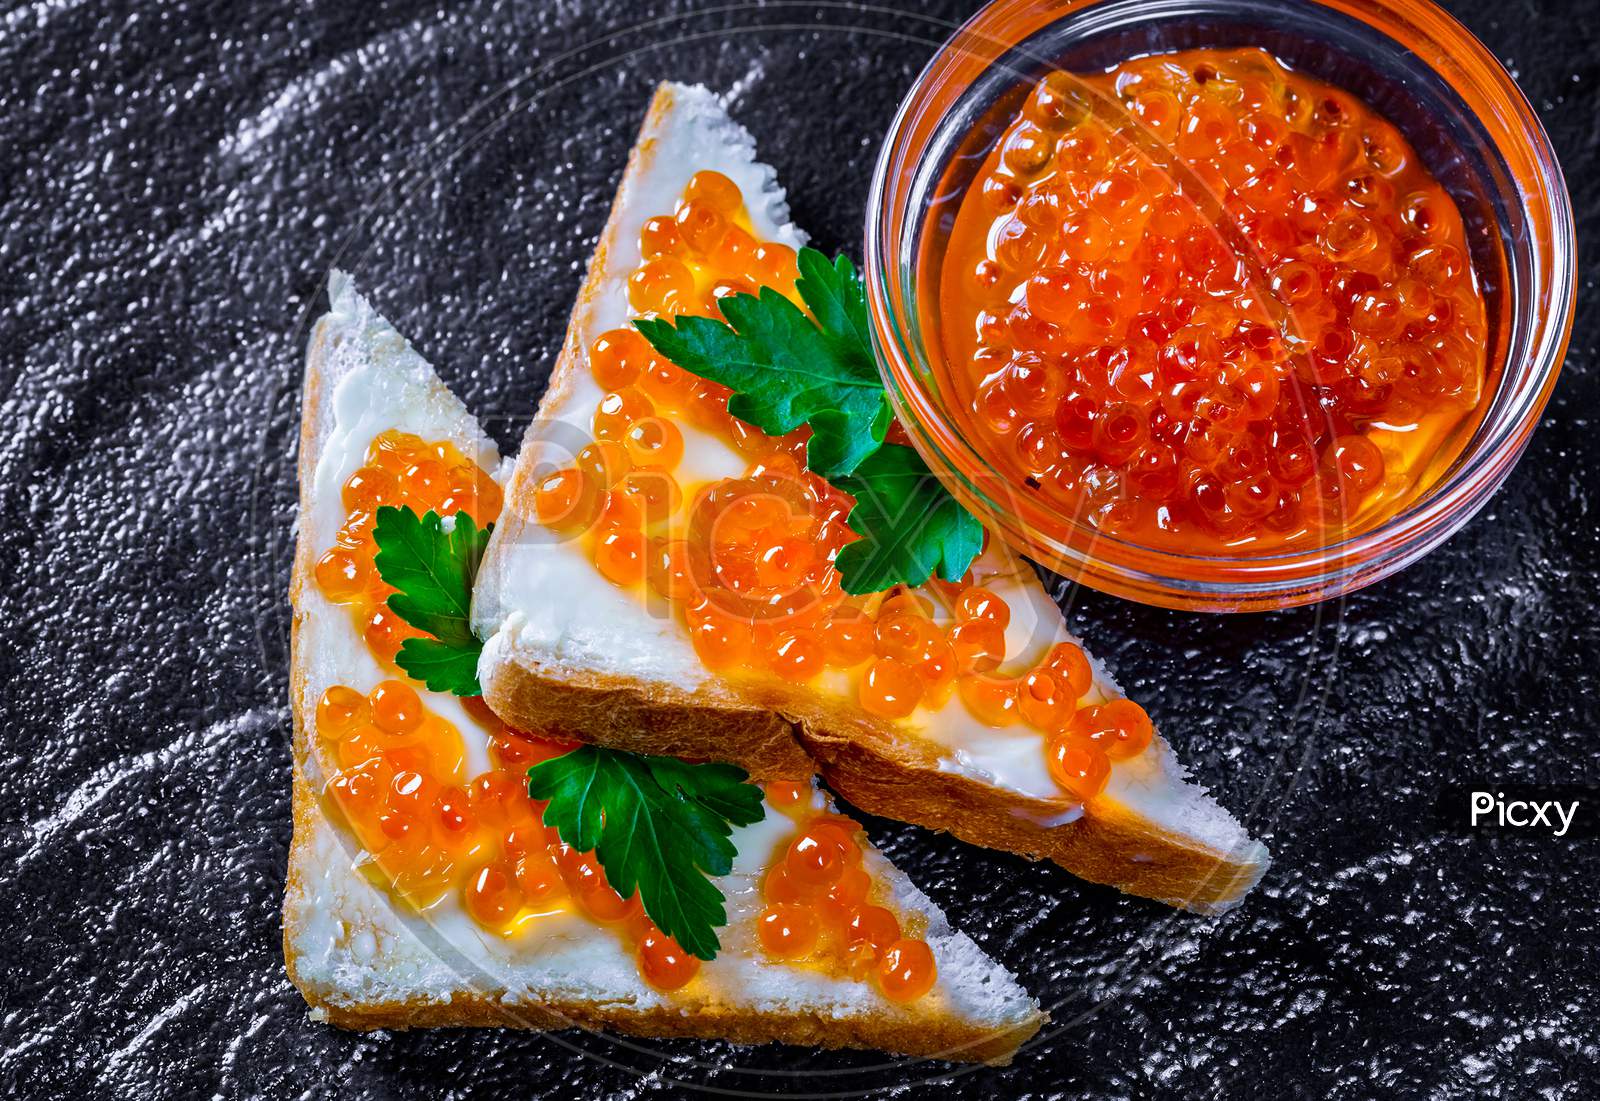 Red caviar in a glass bowl and on sandwiches